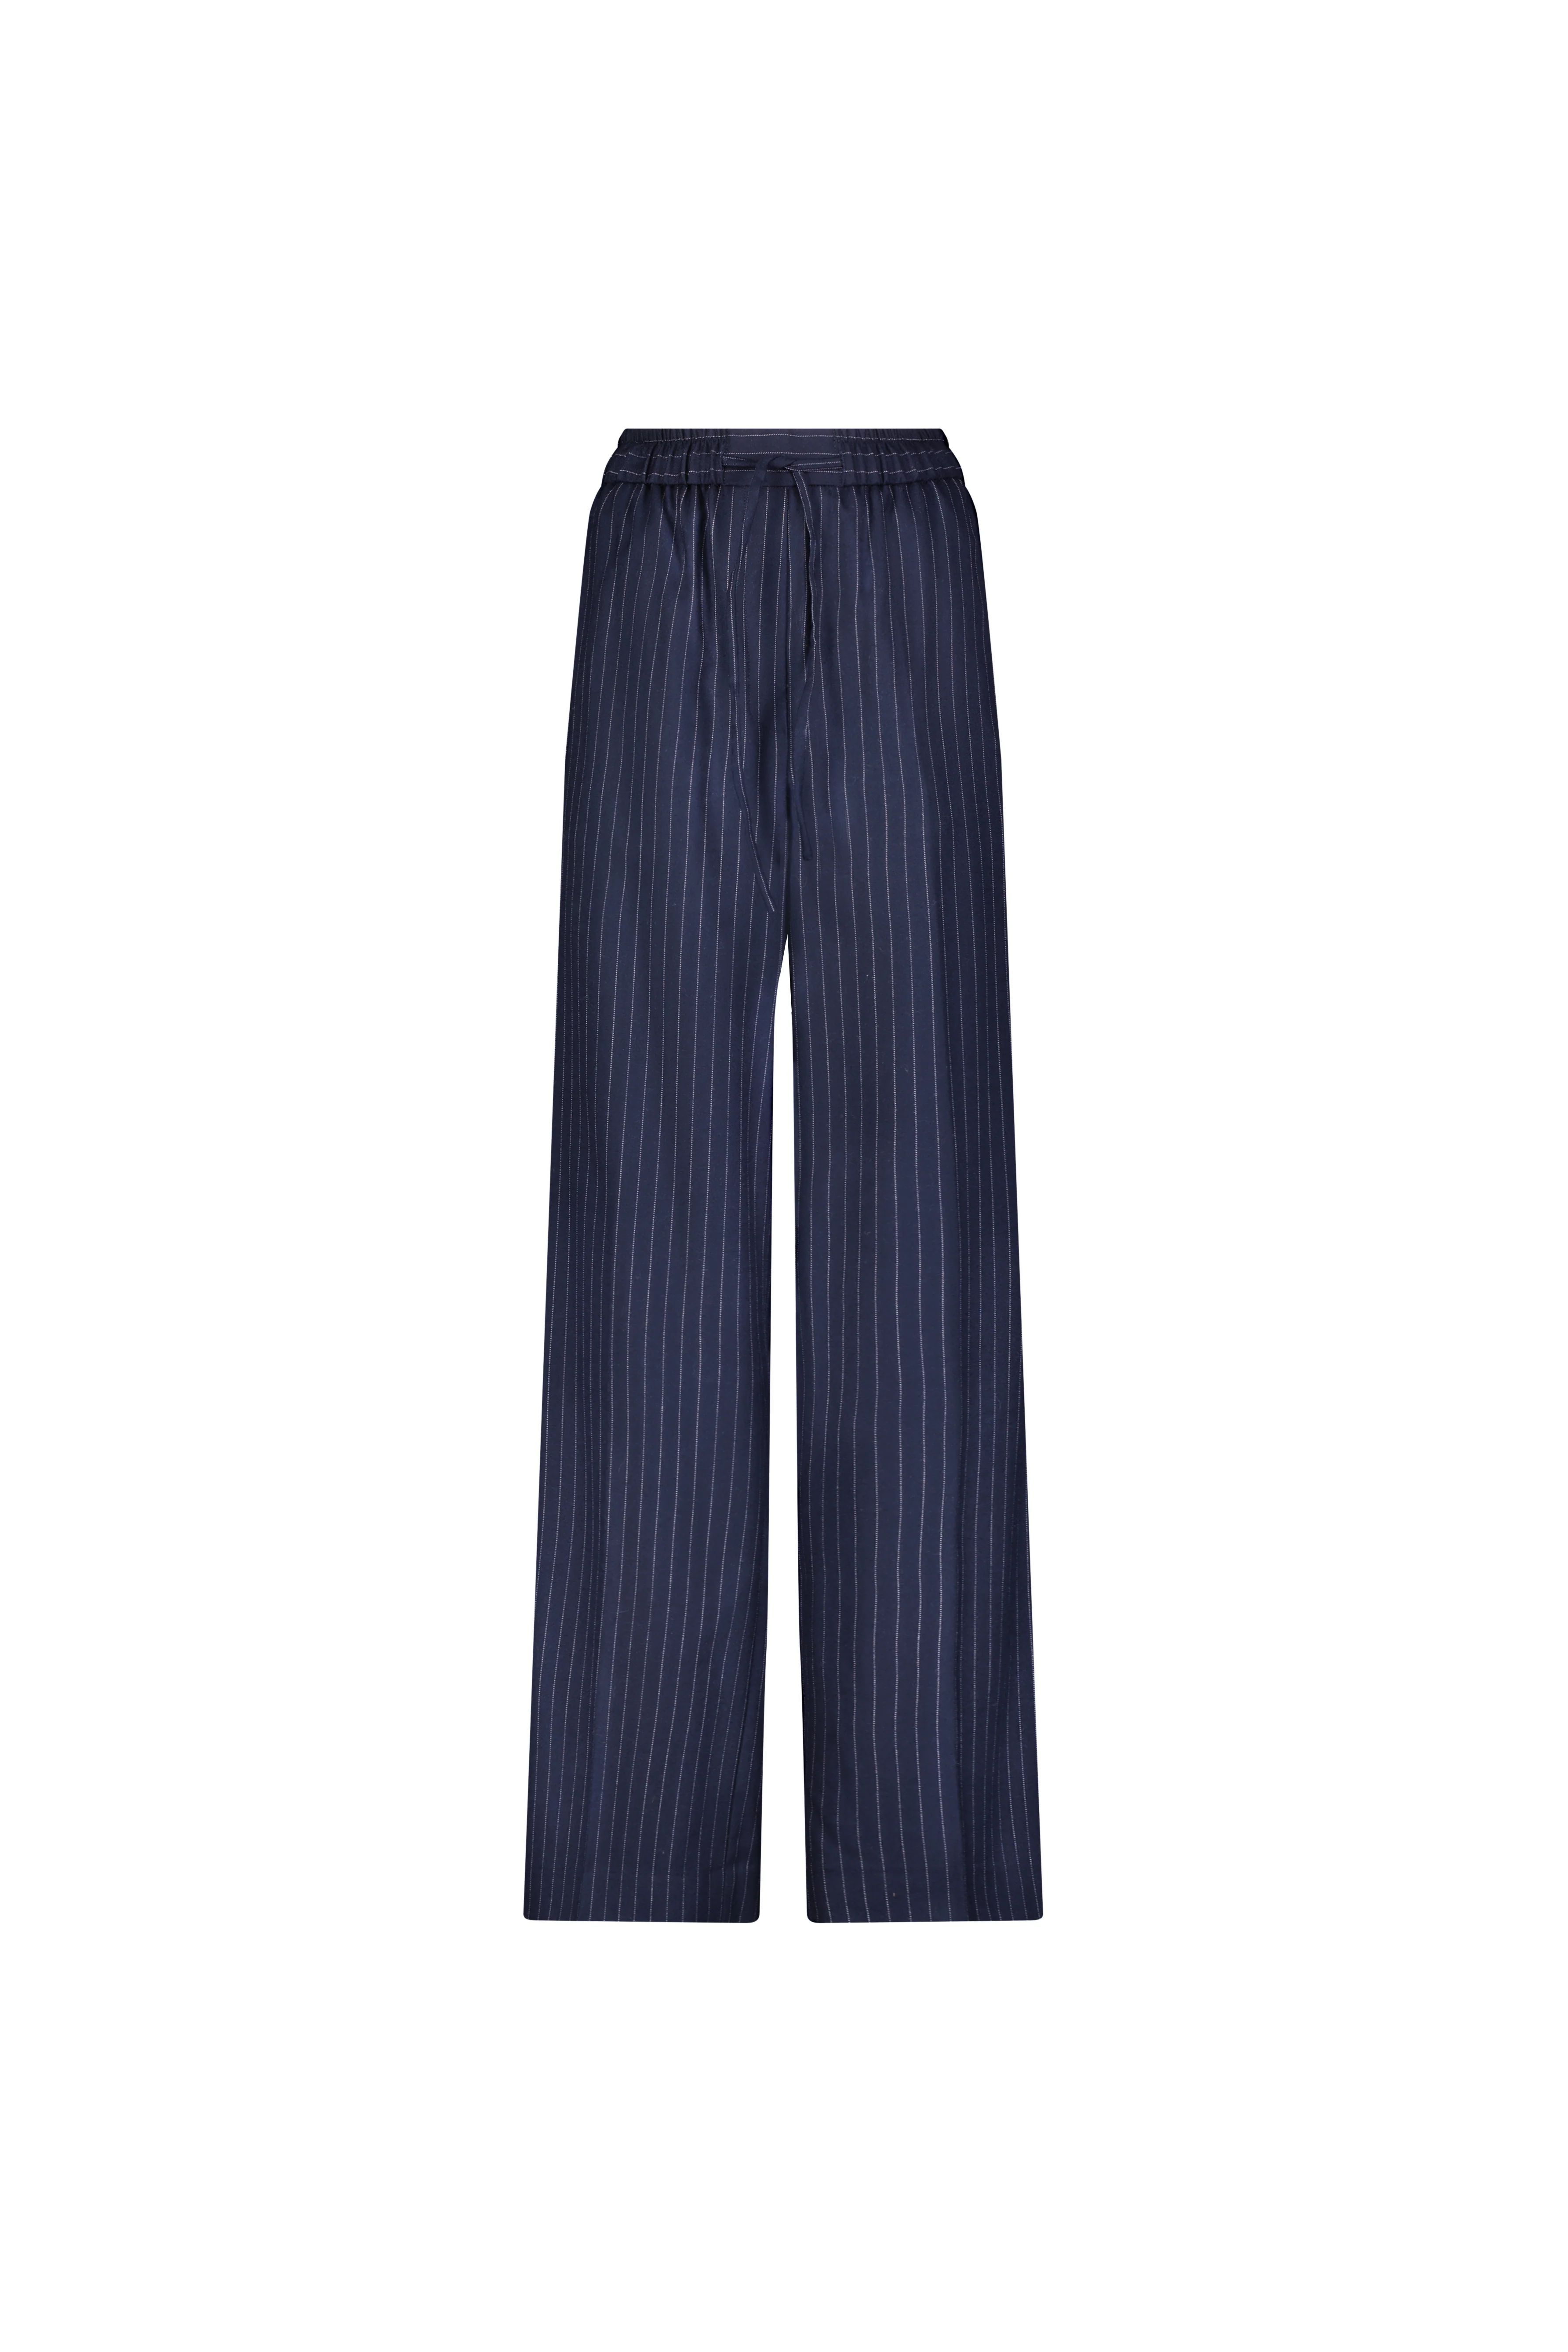 Pinstripe Wool Twill Relaxed Drawstring Pant | MAYSON the label